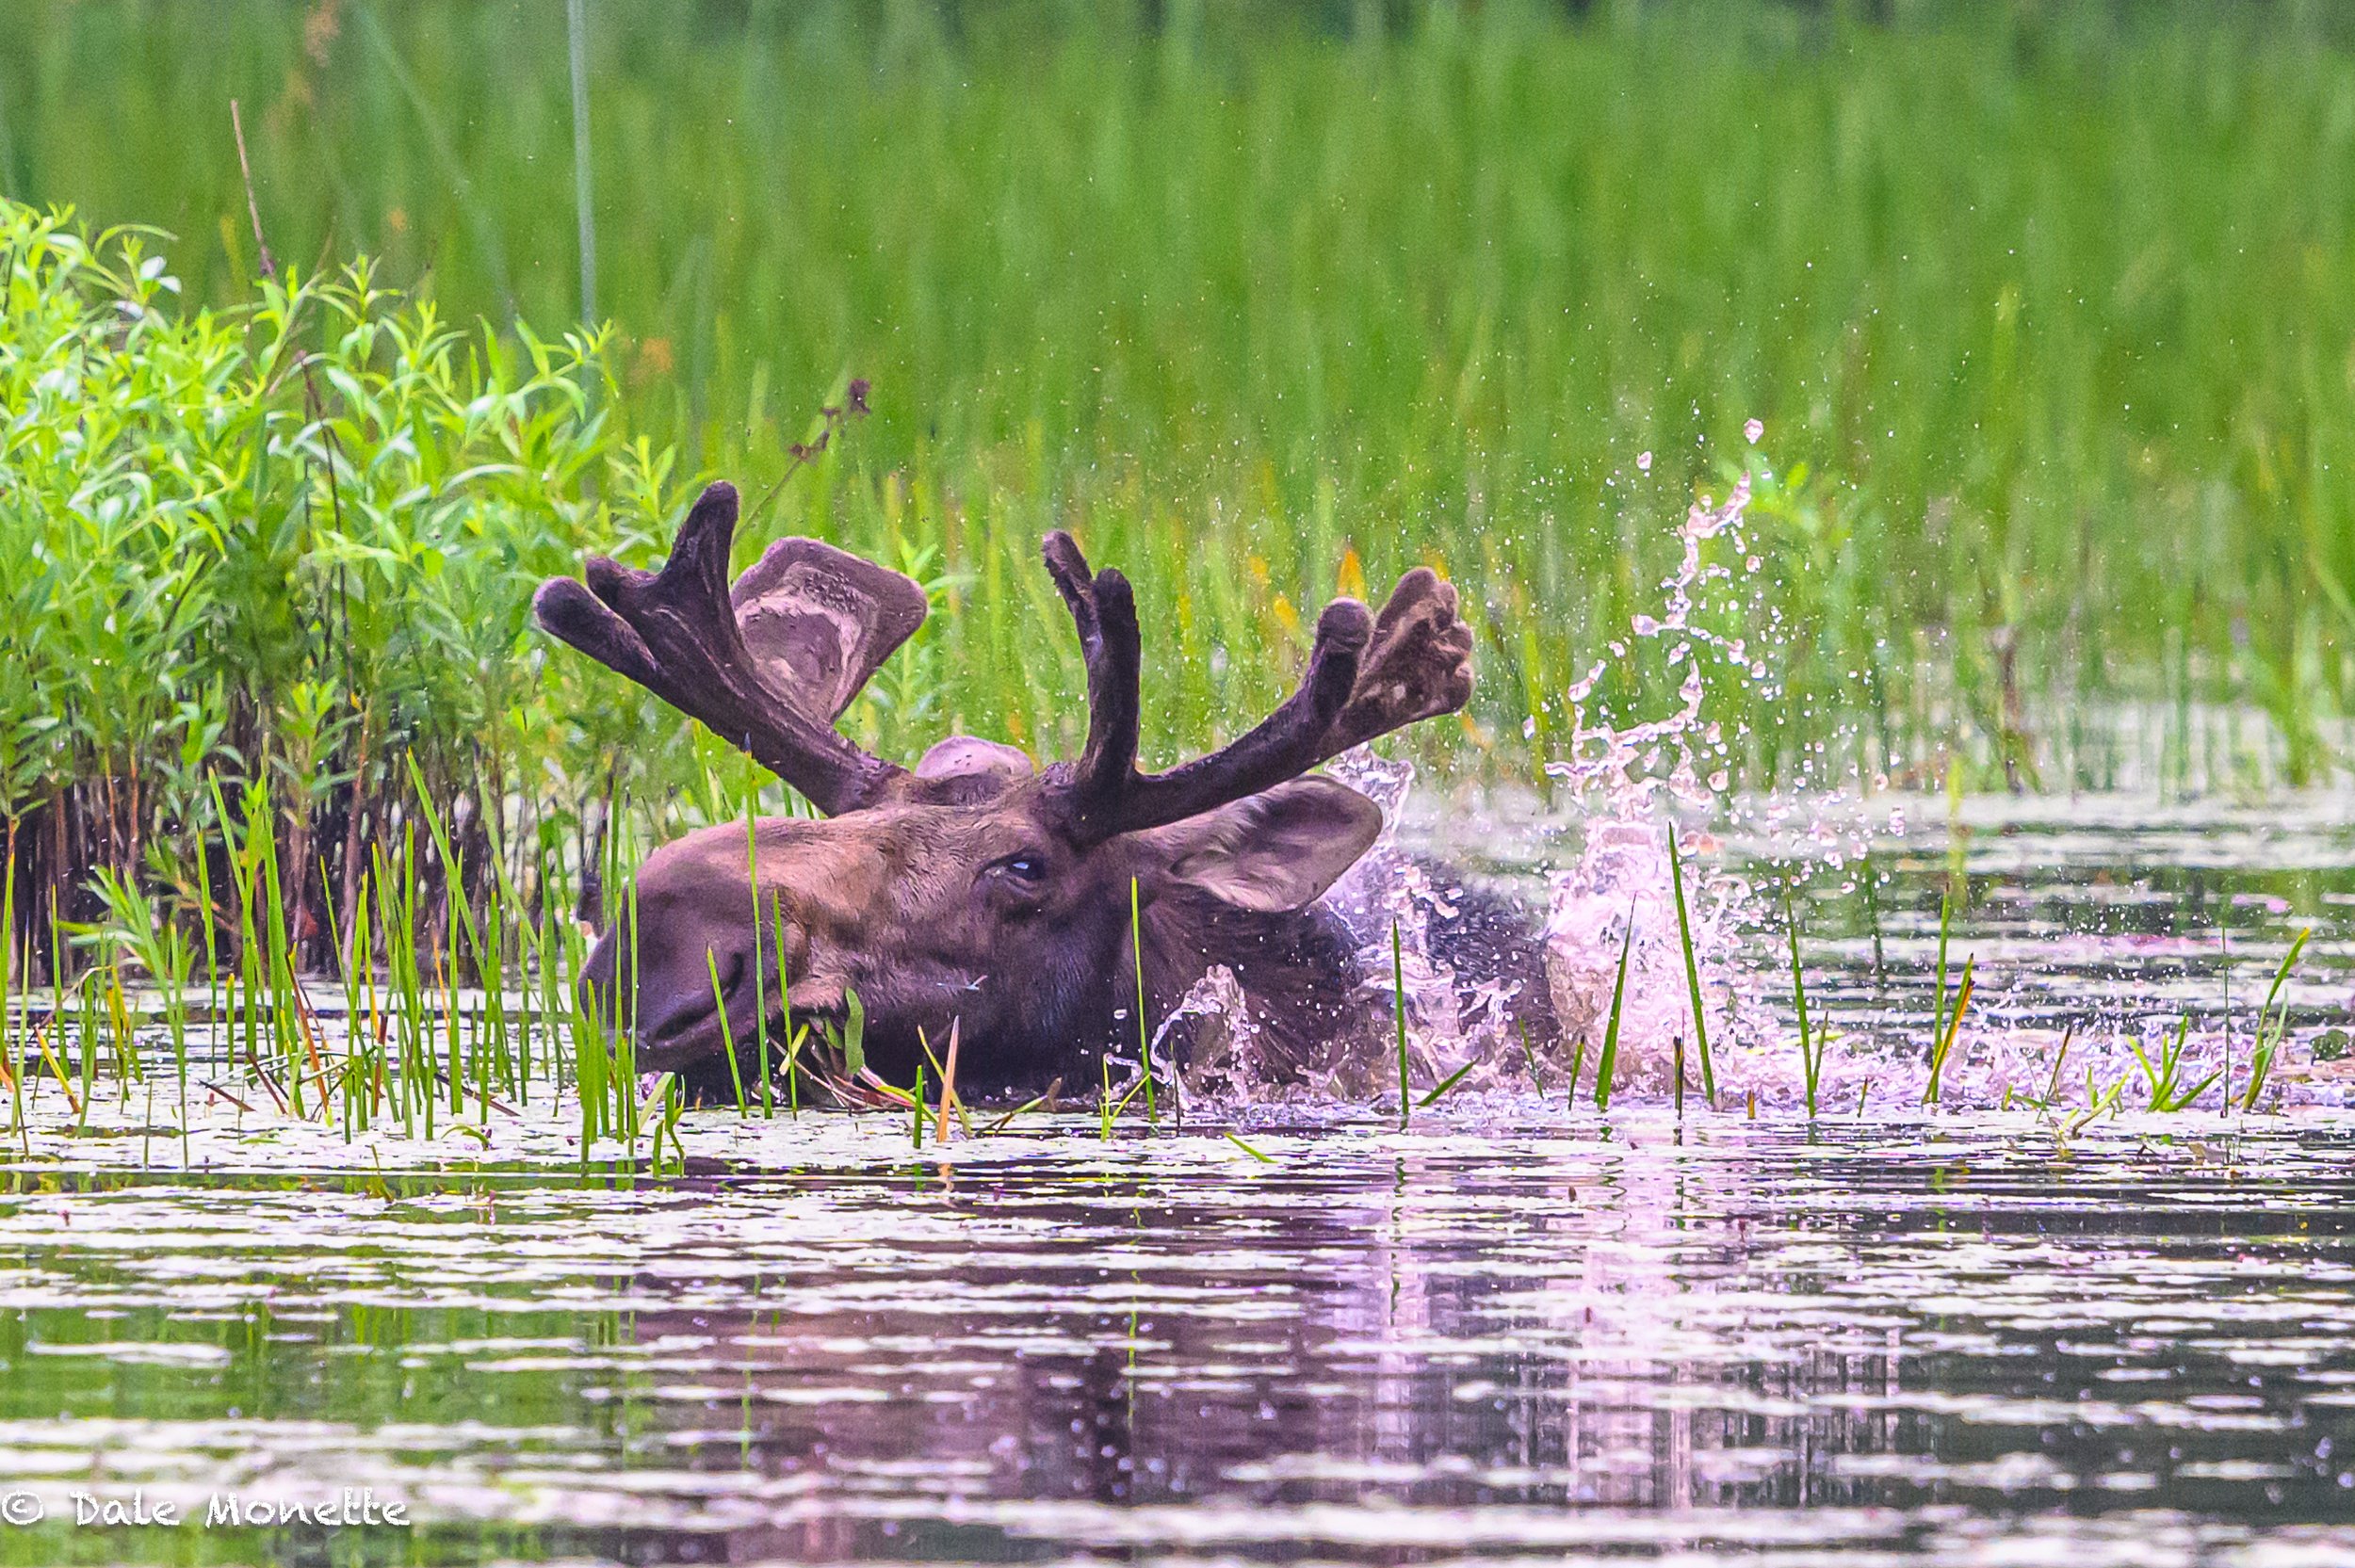   This bull moose was having a bad day with thousands of moose flies buzzing around him.  